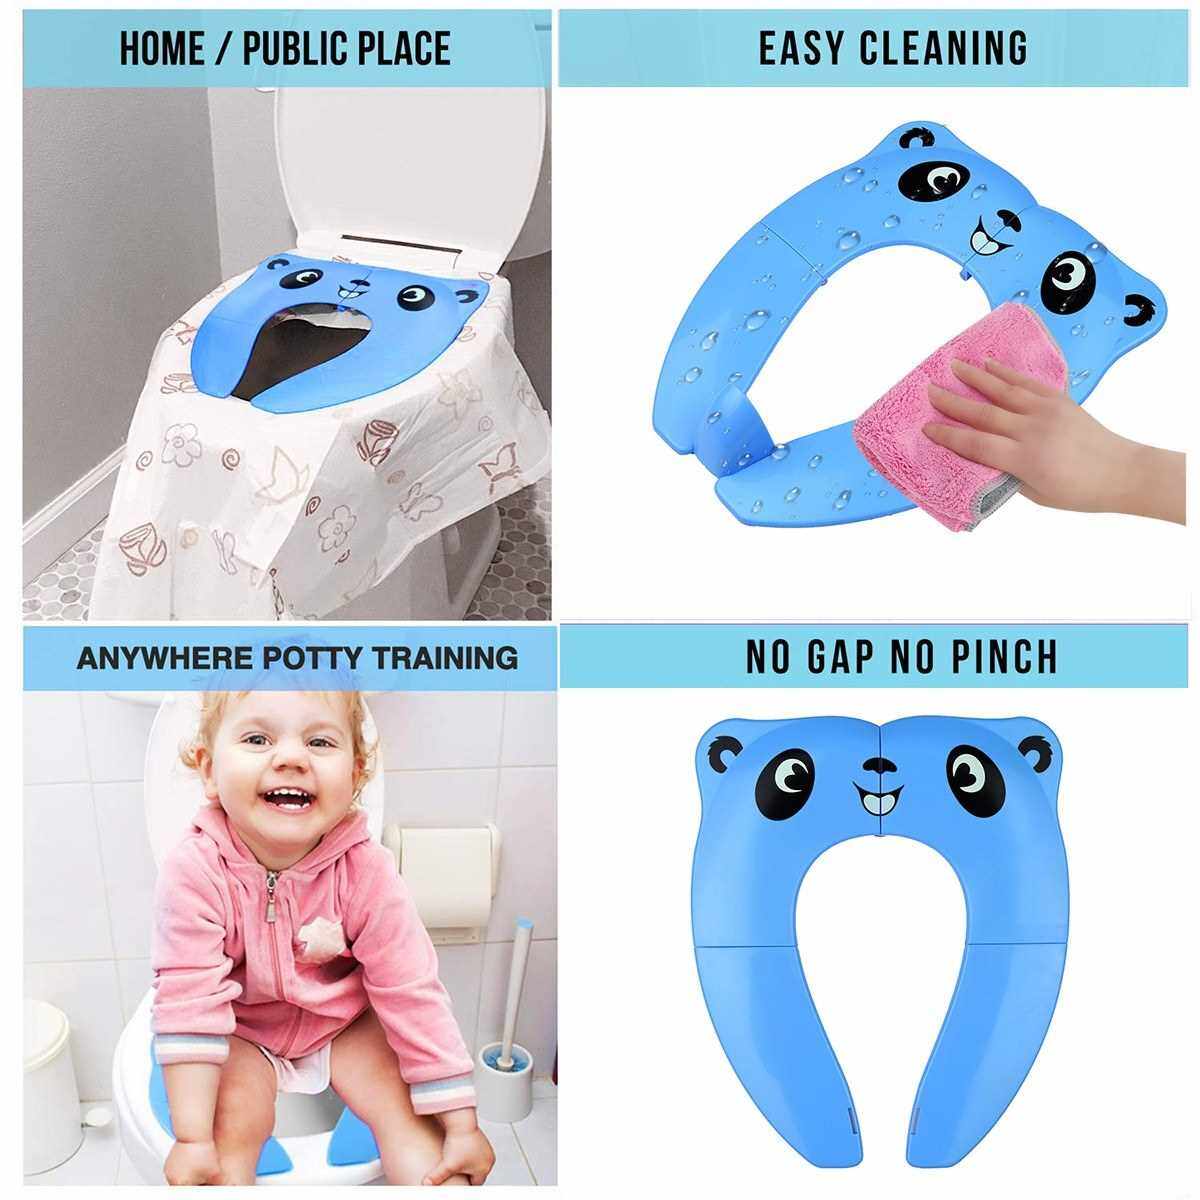 People's Choice Potty Training Seat Folding Portable Toilet Seat Cover Non-Slip with Splash Guard for Baby, Toddlers and Kids with Drawstring Bag (Blue)